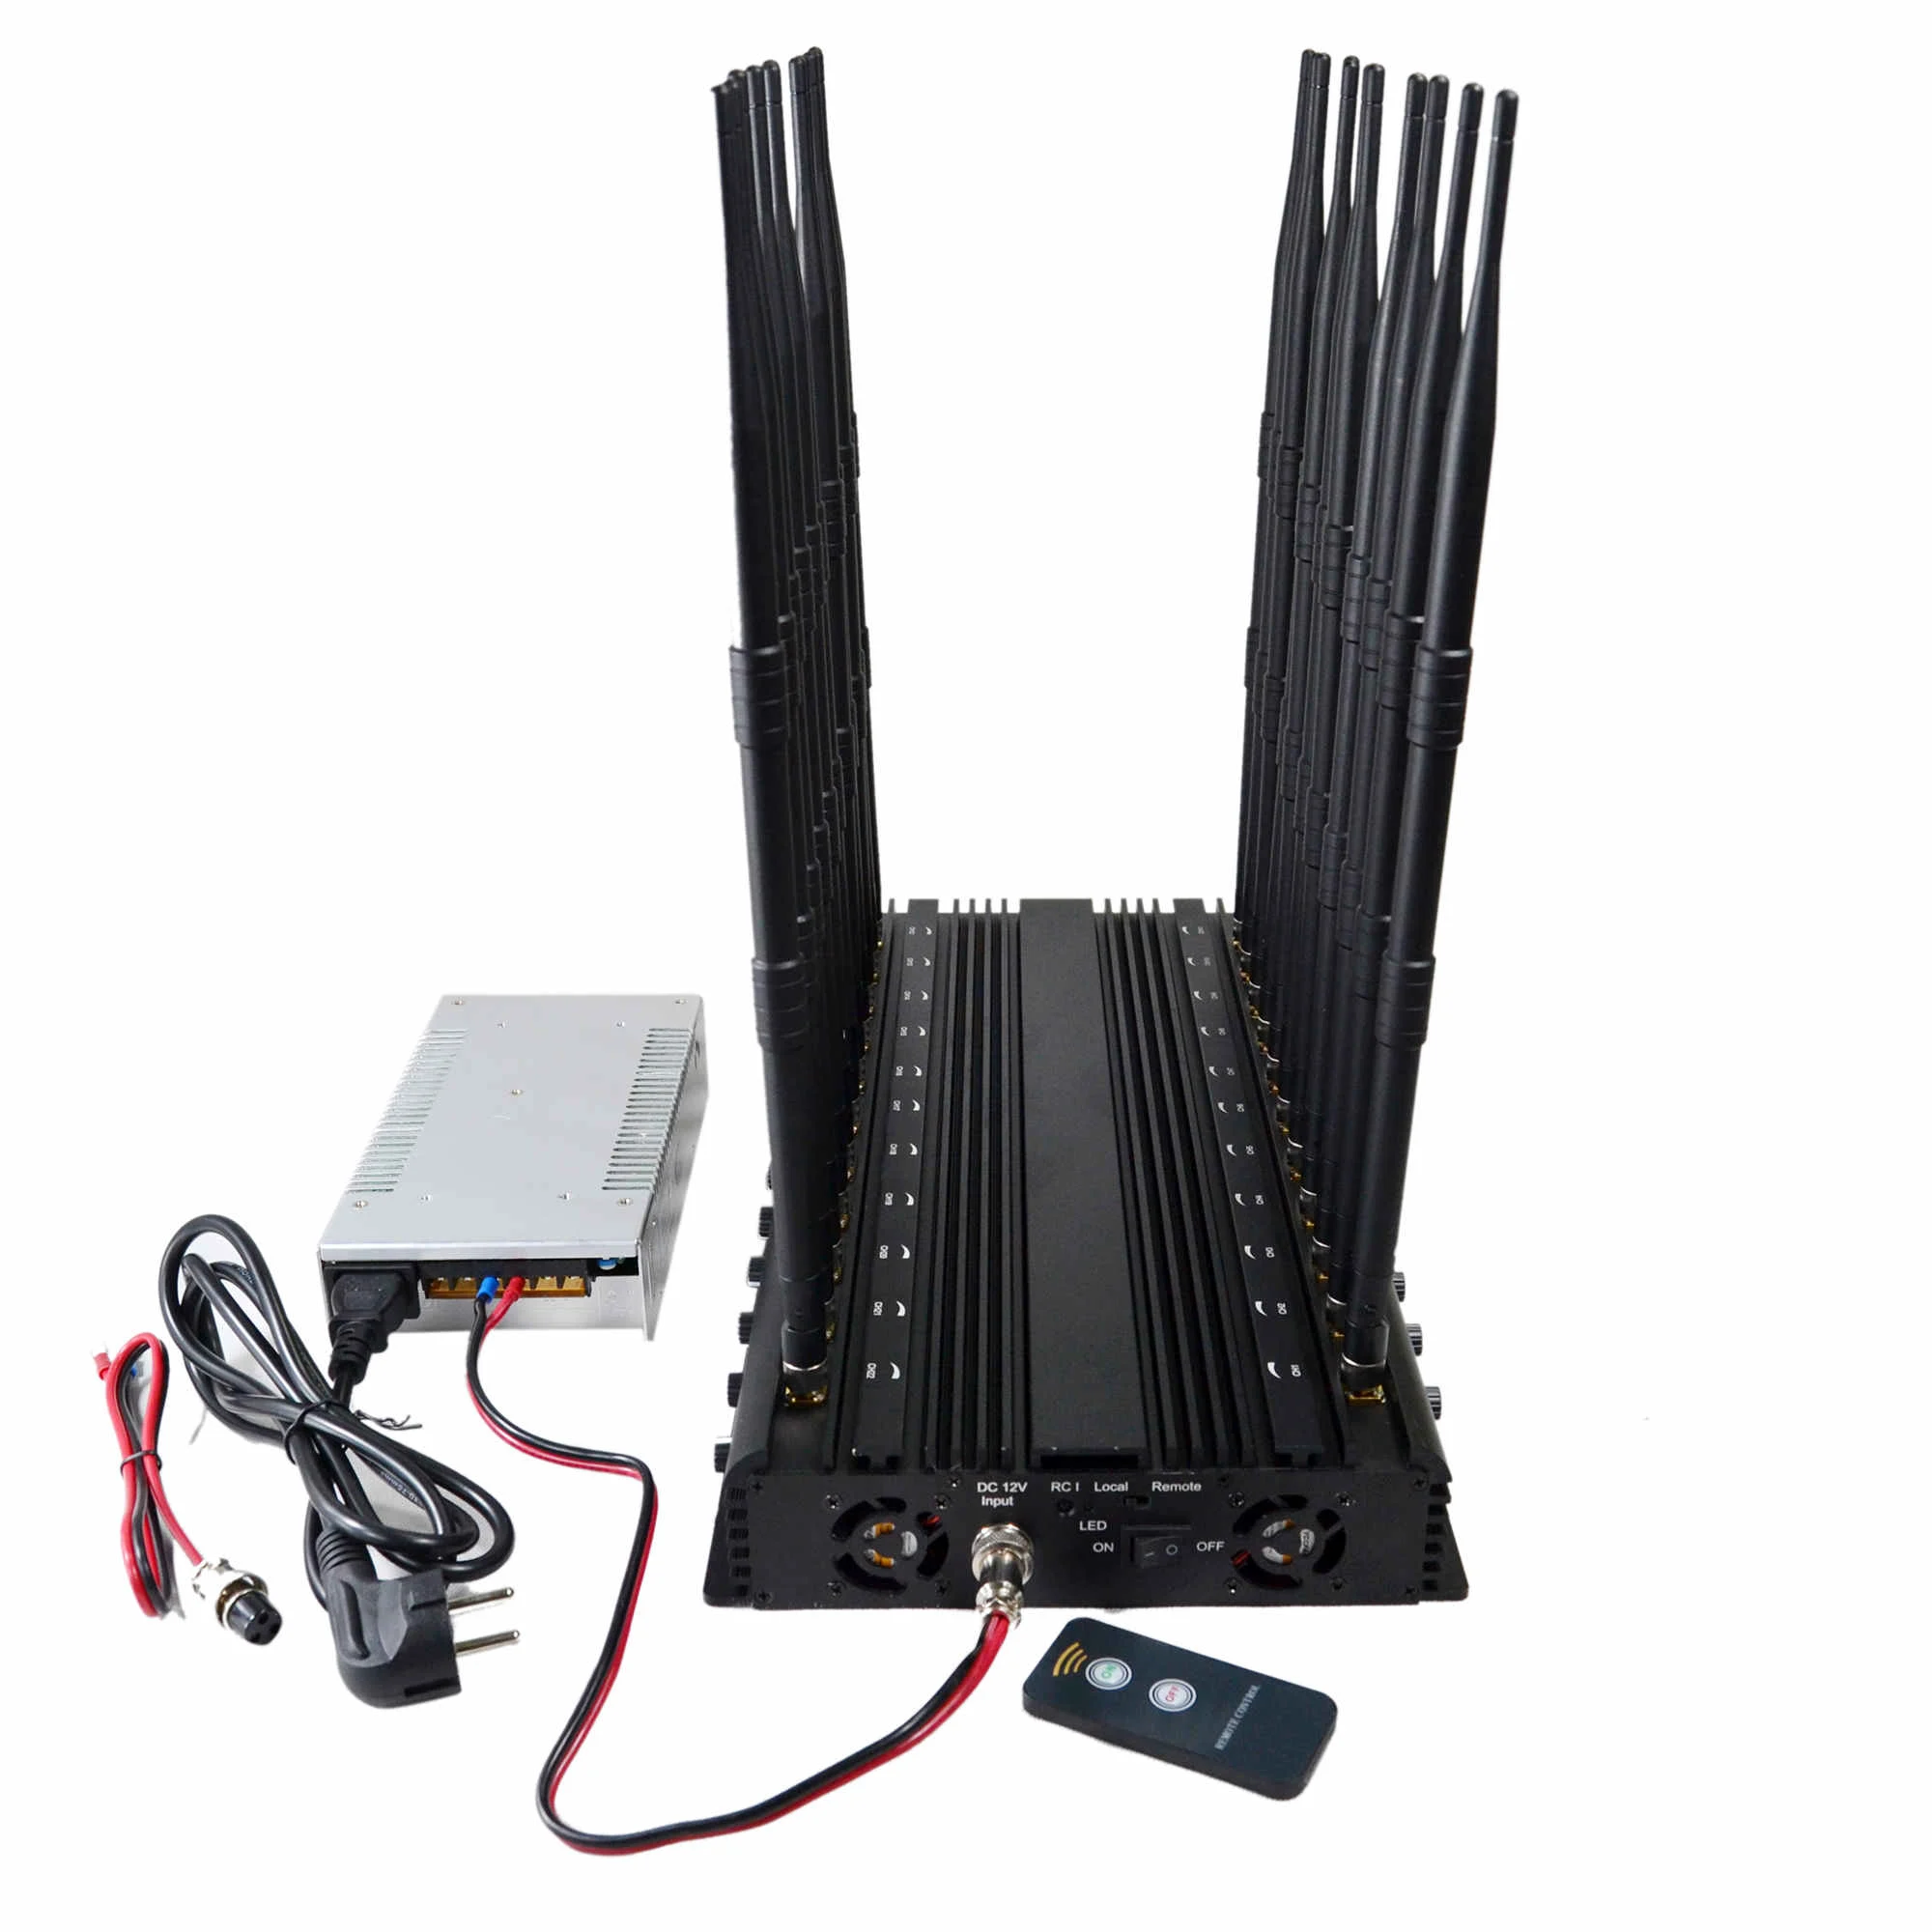 Is it reasonable to install GSM mobile phone signal jammer as a school?